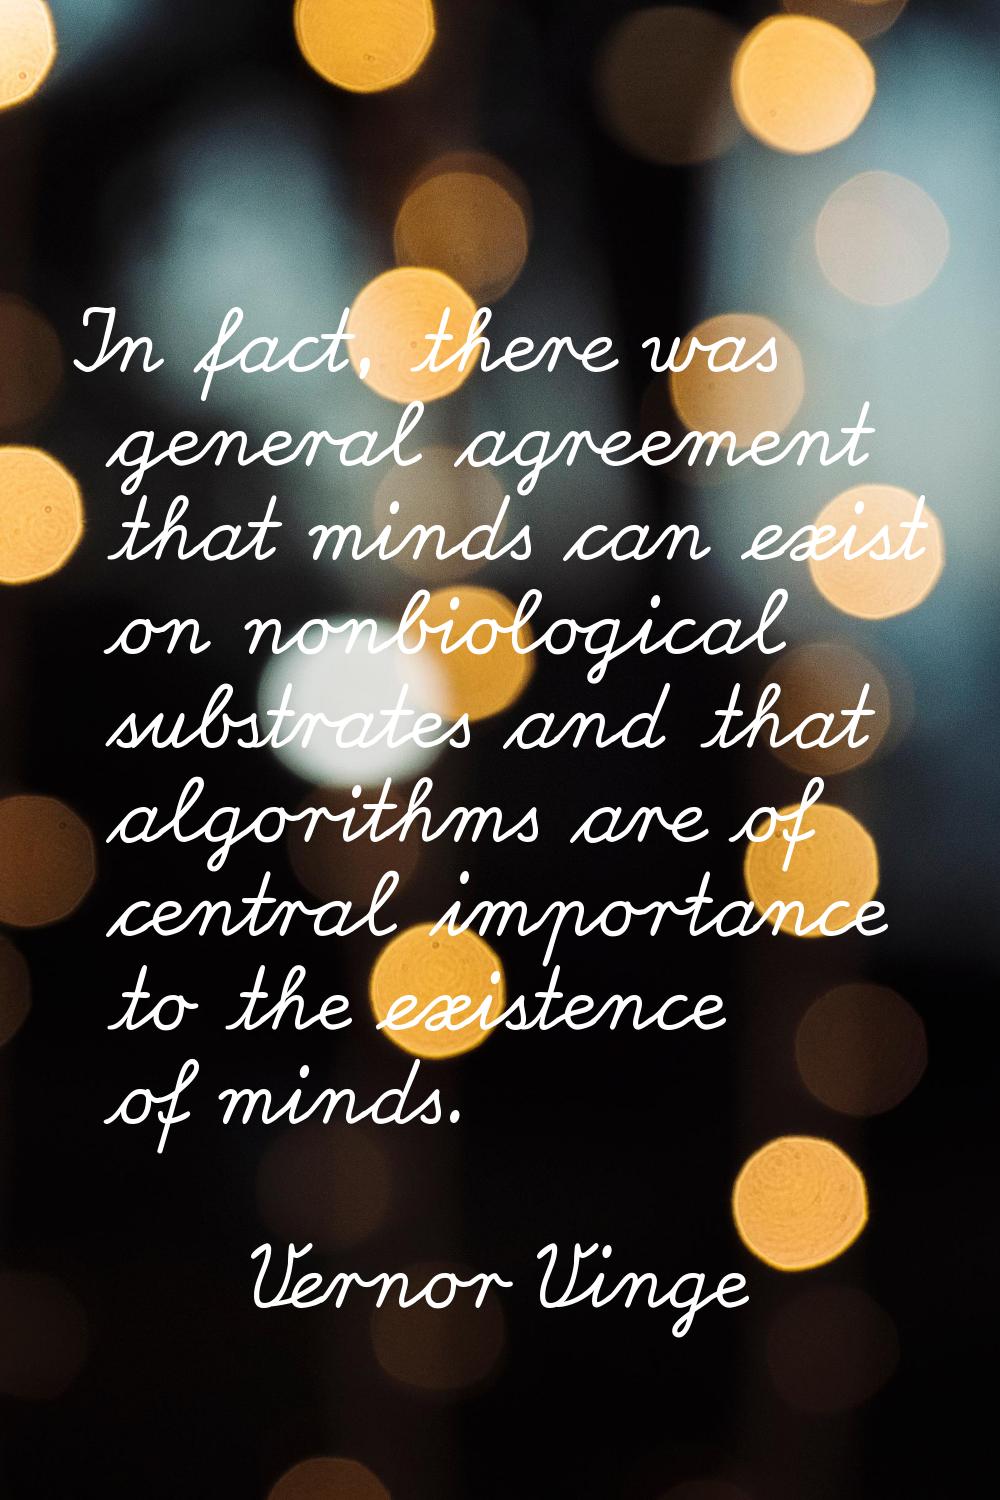 In fact, there was general agreement that minds can exist on nonbiological substrates and that algo